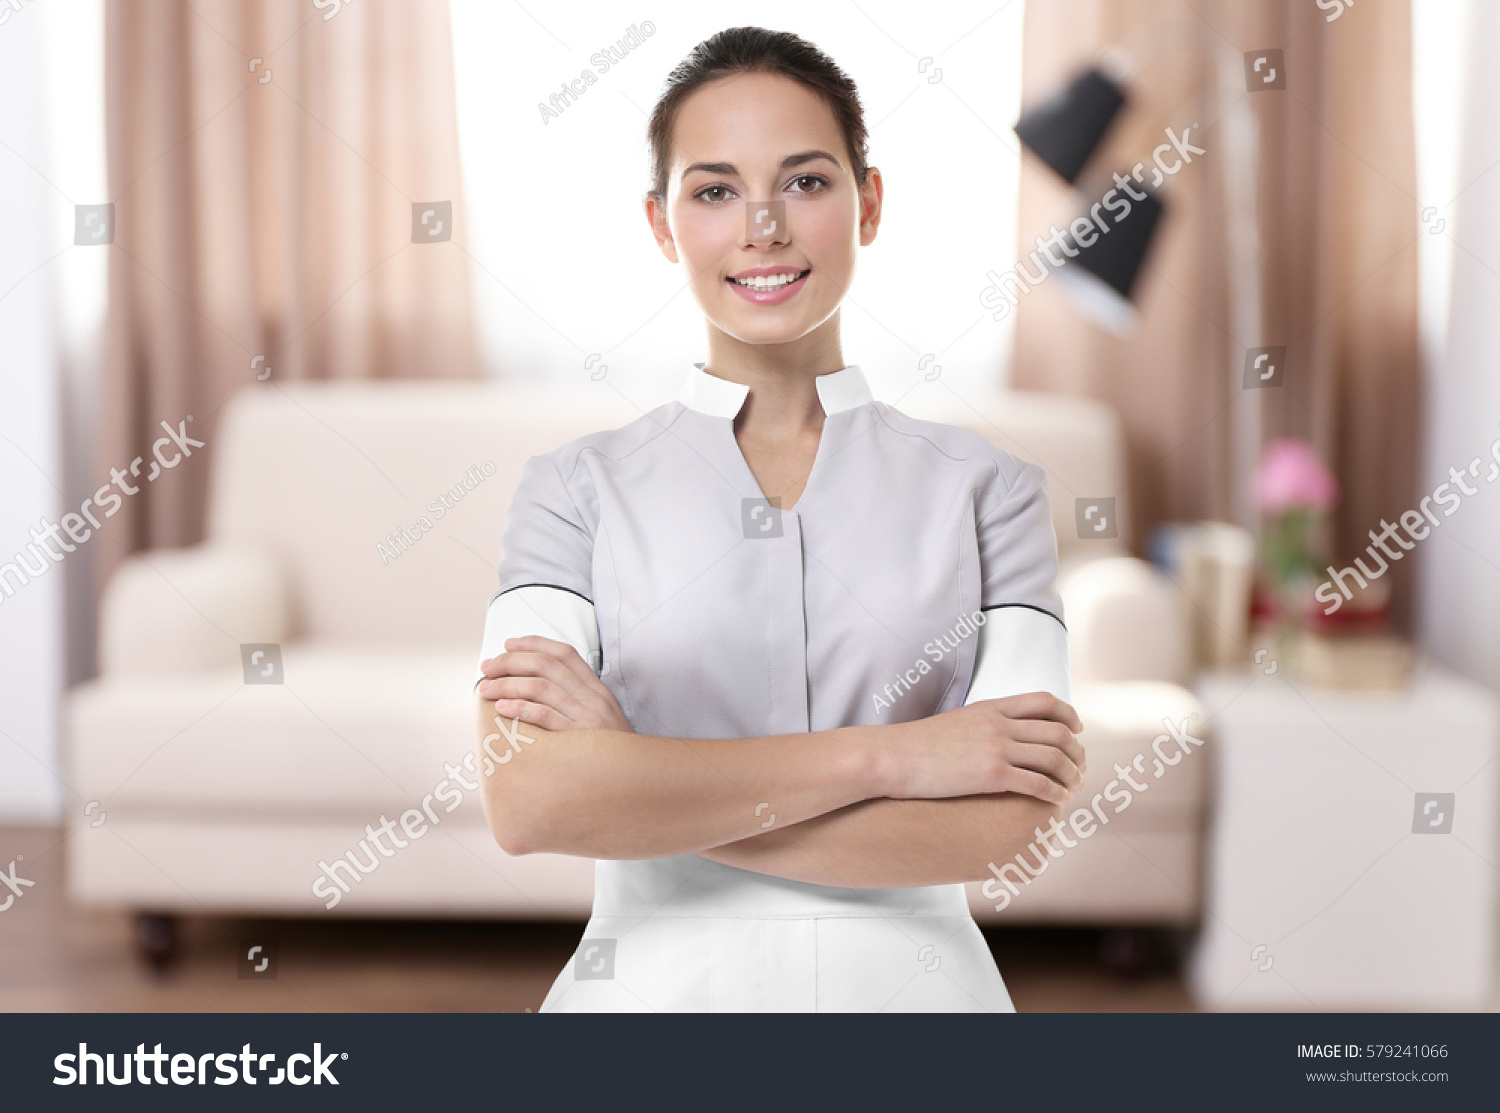 Chambermaid standing on living room background #579241066